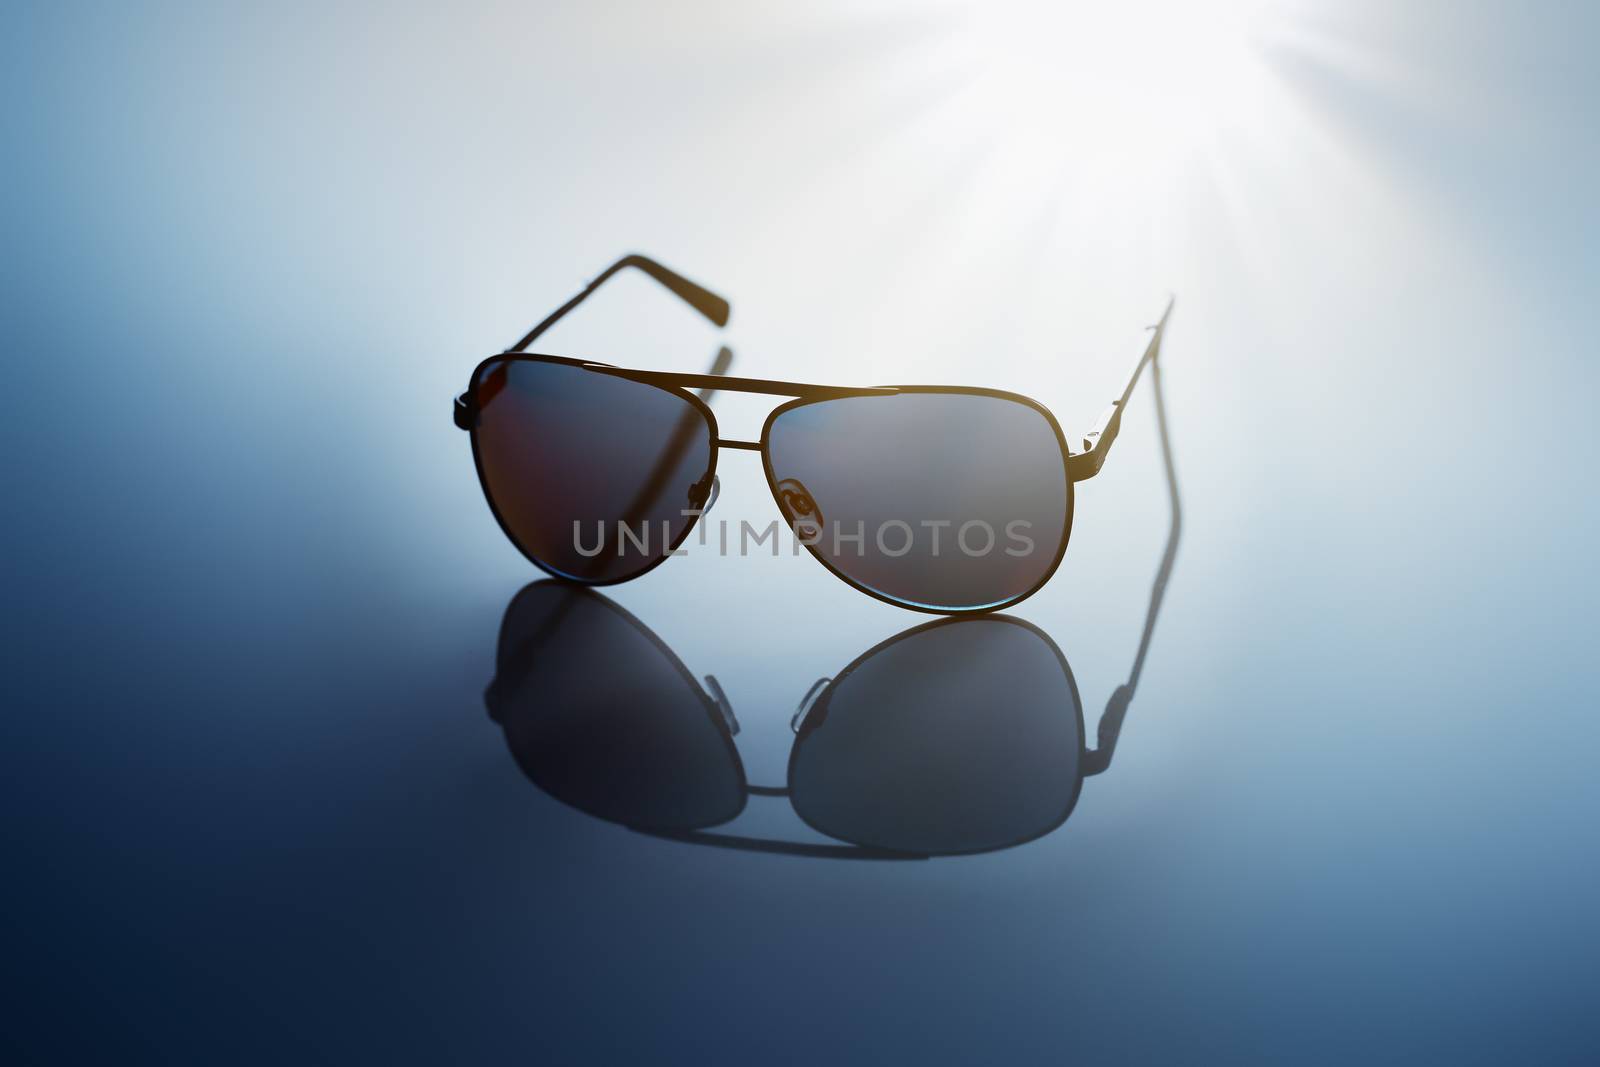 Sunglasses by Stocksnapper